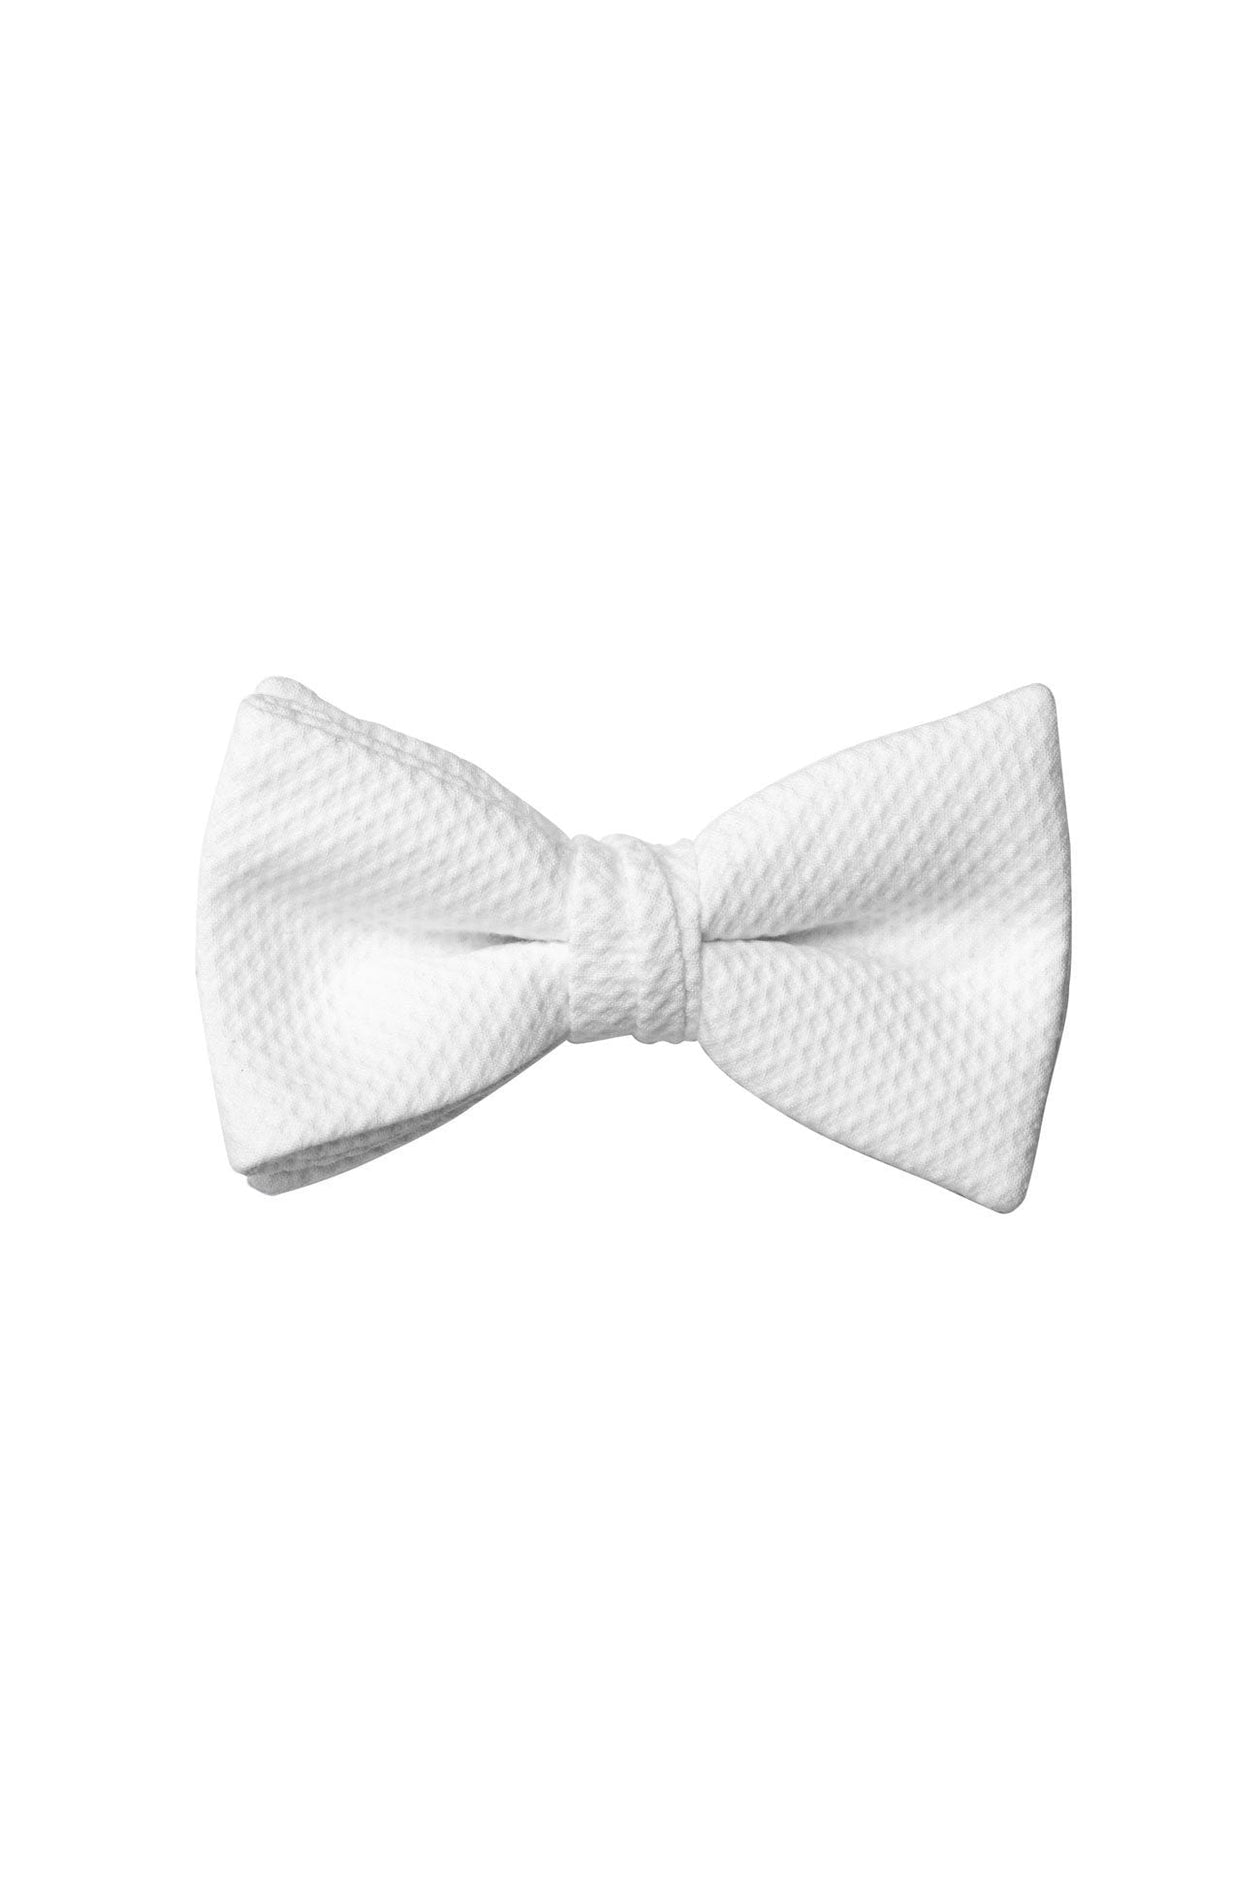 Classic Collection White Pique Bow Tie